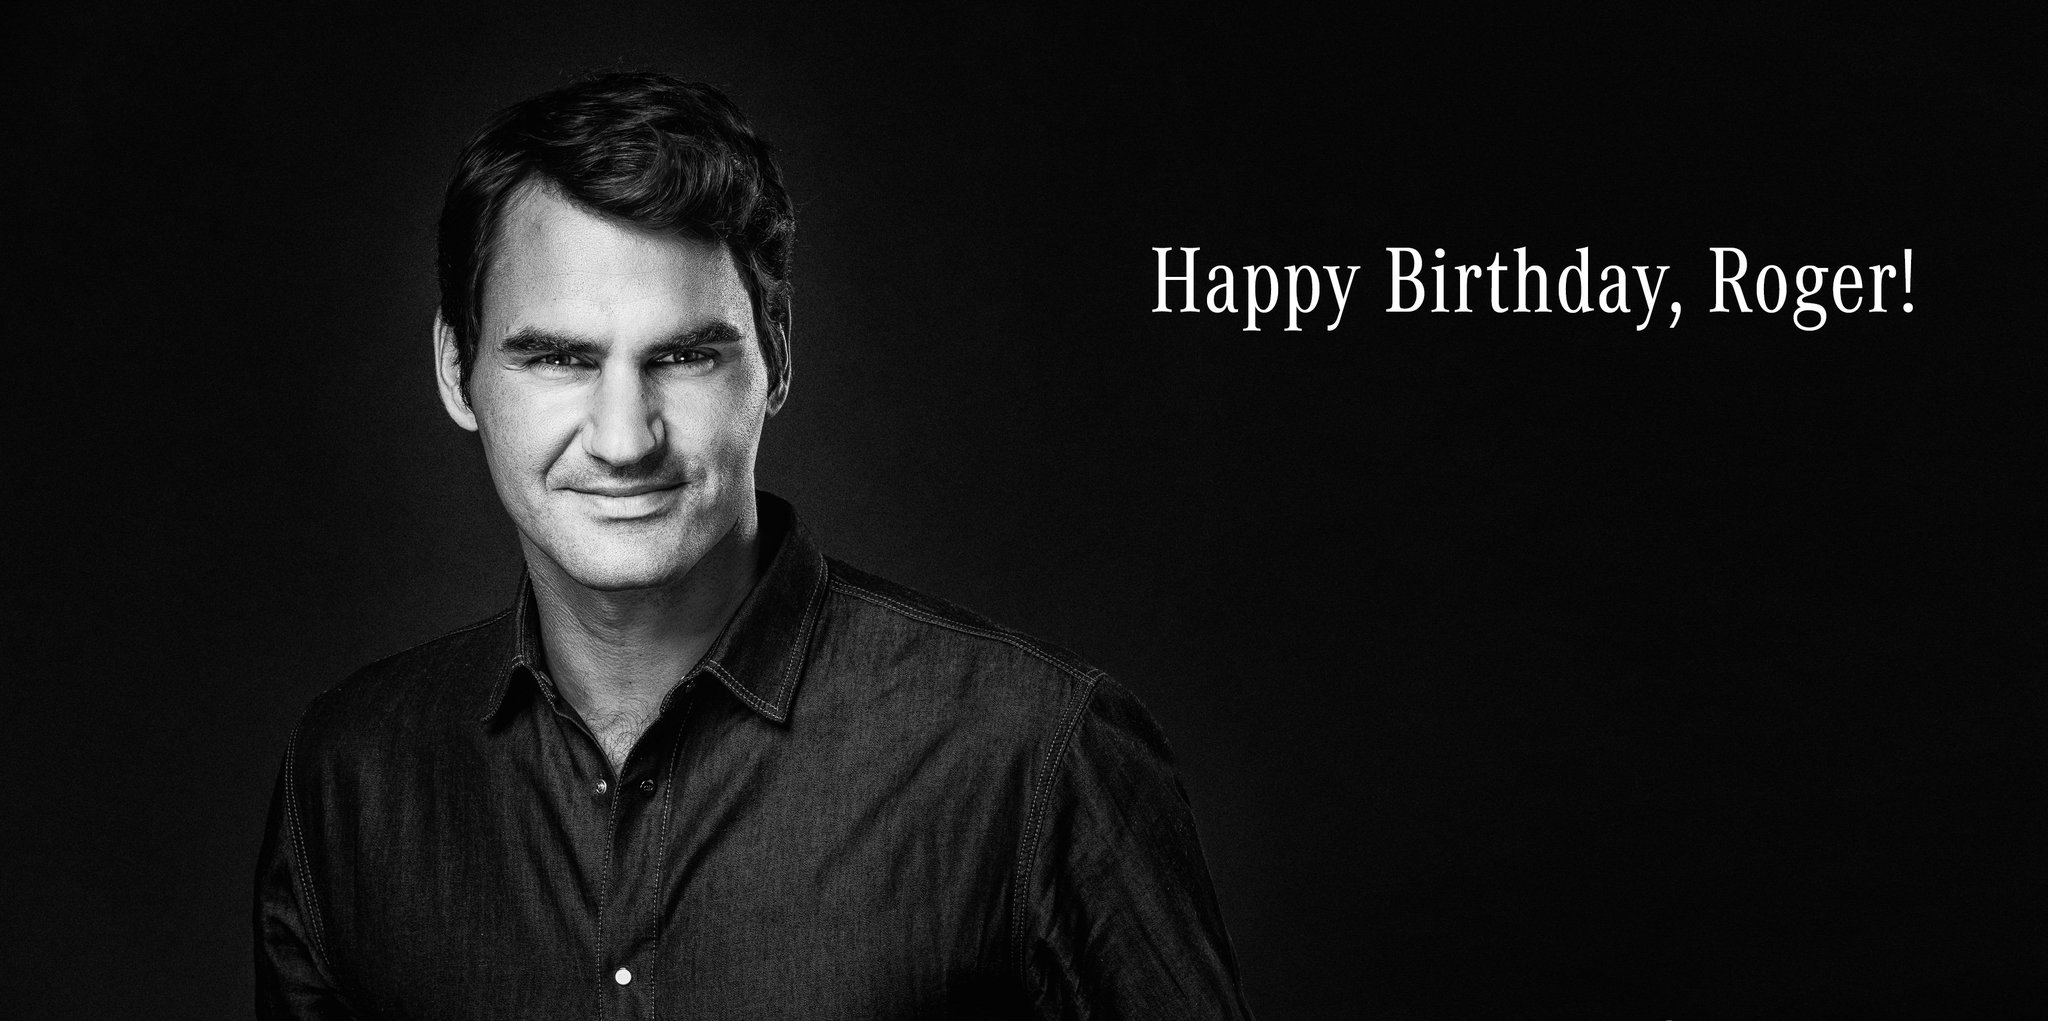 Mercedes Benz We Re Wishing Our Champion Brand Ambassador Rogerfederer A Happy Birthday A True Inspiration For Our Generation On And Off The Field T Co C77xzzwwu7